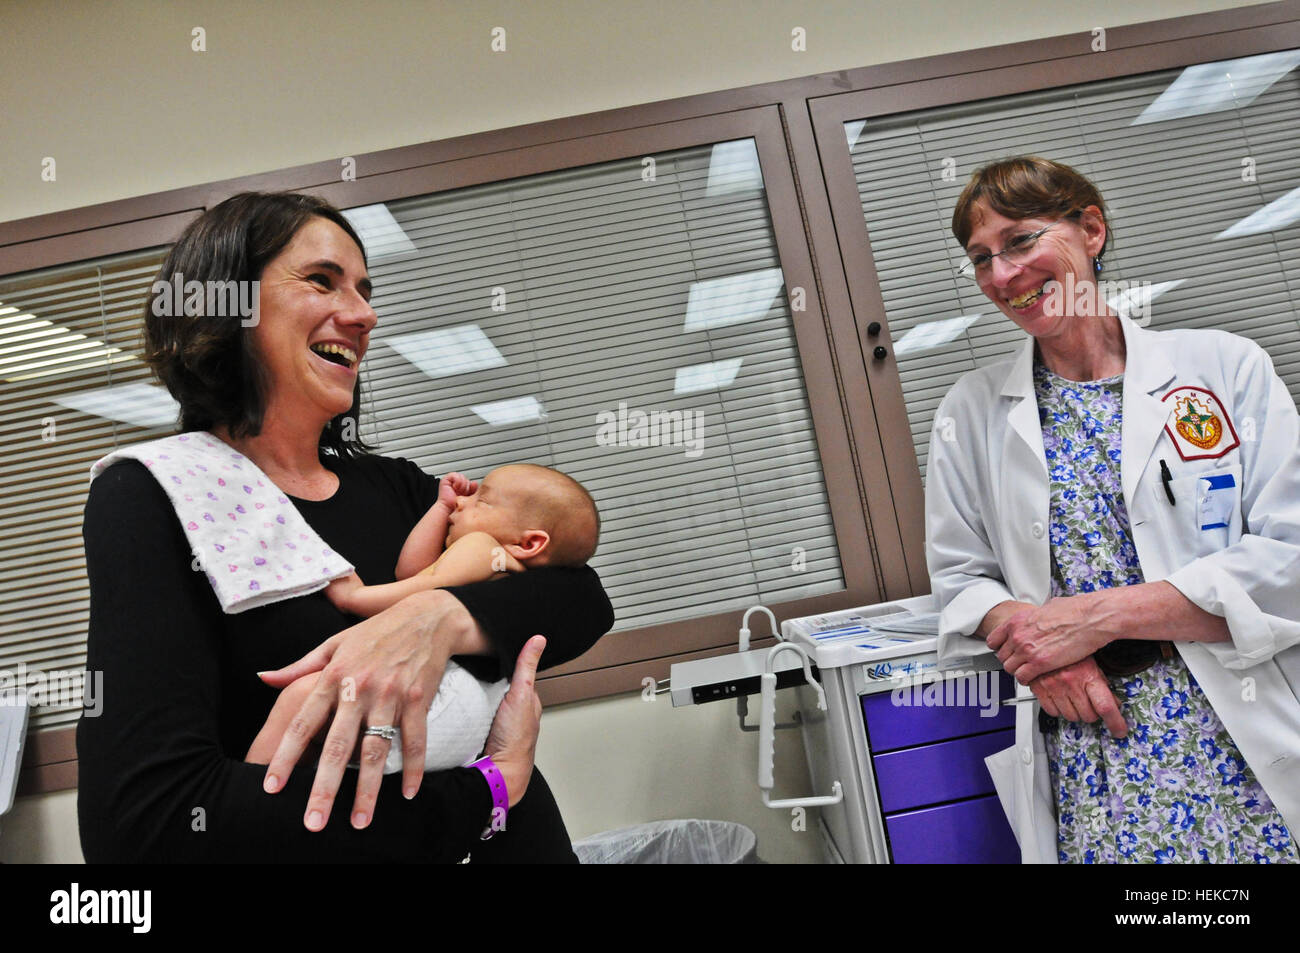 Jenn Hemmer (left) - her 4-week-old daughter, Riley, in her arms - speaks with pediatrician Elizabeth Hasert Aug. 2 at Madigan Army Medical Center on Joint Base Lewis-McChord, Wash., about healthy baby weights during one of the hospital's Moms Own Milk group sessions. MOMs group is a twice-weekly organized effort by the MAMC lactation consultant office to bring breastfeeding mothers together with staff members who provide education on the topic, support, weigh-ins and advice concerning every aspect of breastfeeding. 'A special kind of bond,' Amidst World Breastfeeding Week, group offers new JB Stock Photo